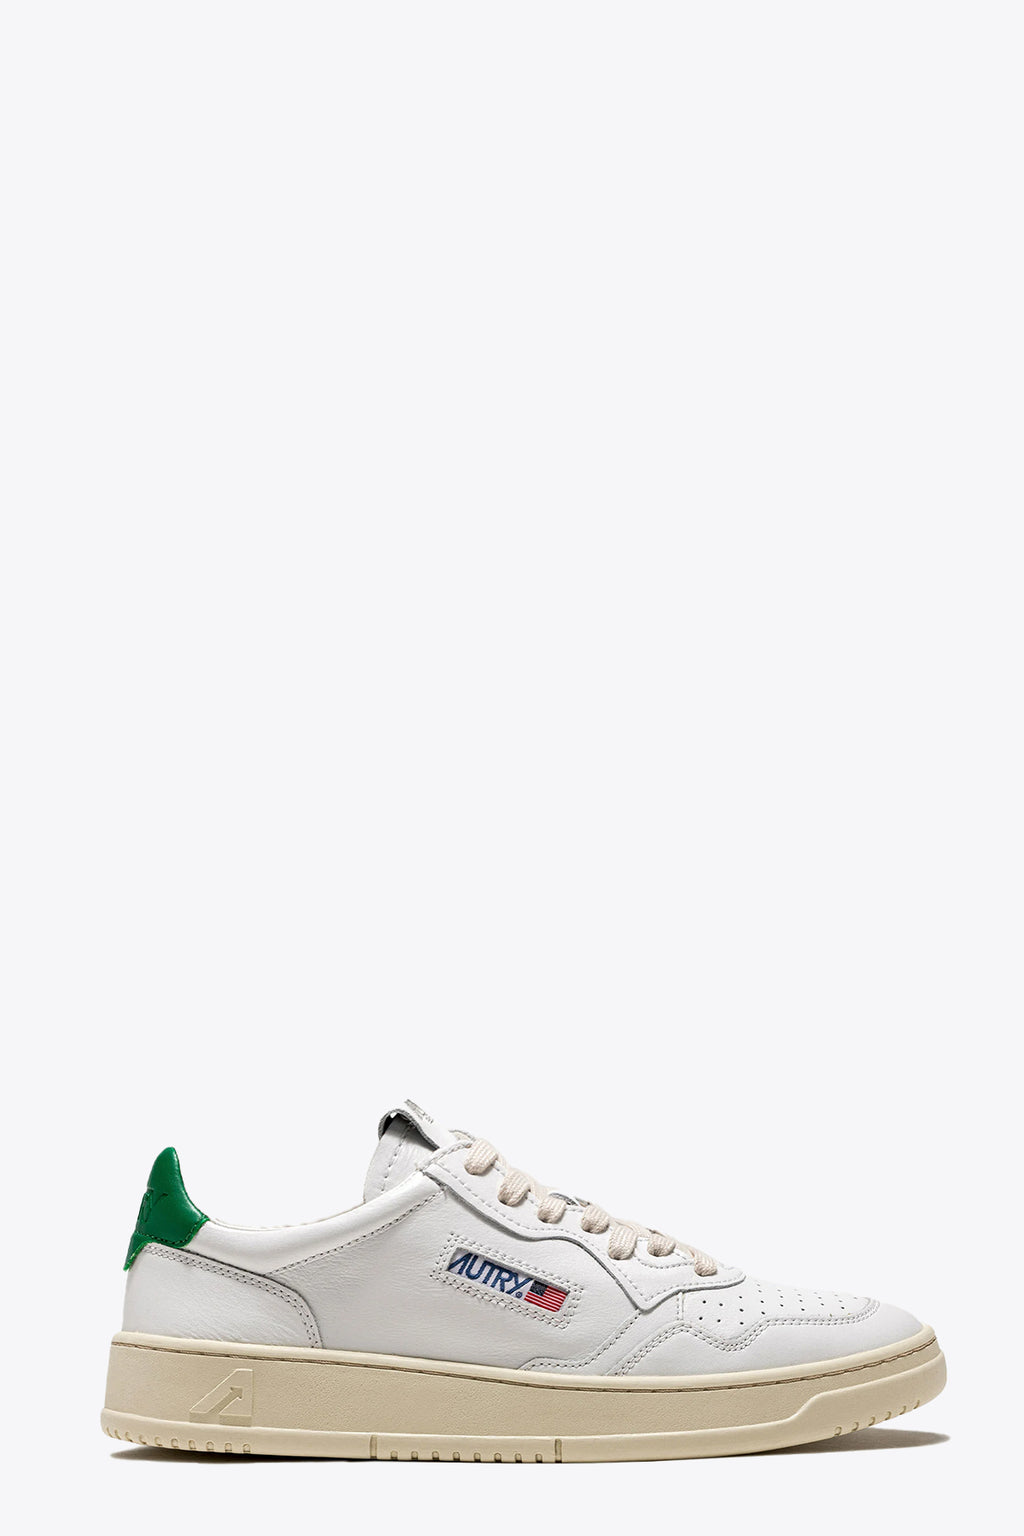 alt-image__White-leather-low-sneaker-with-green-back-tab---Medalist